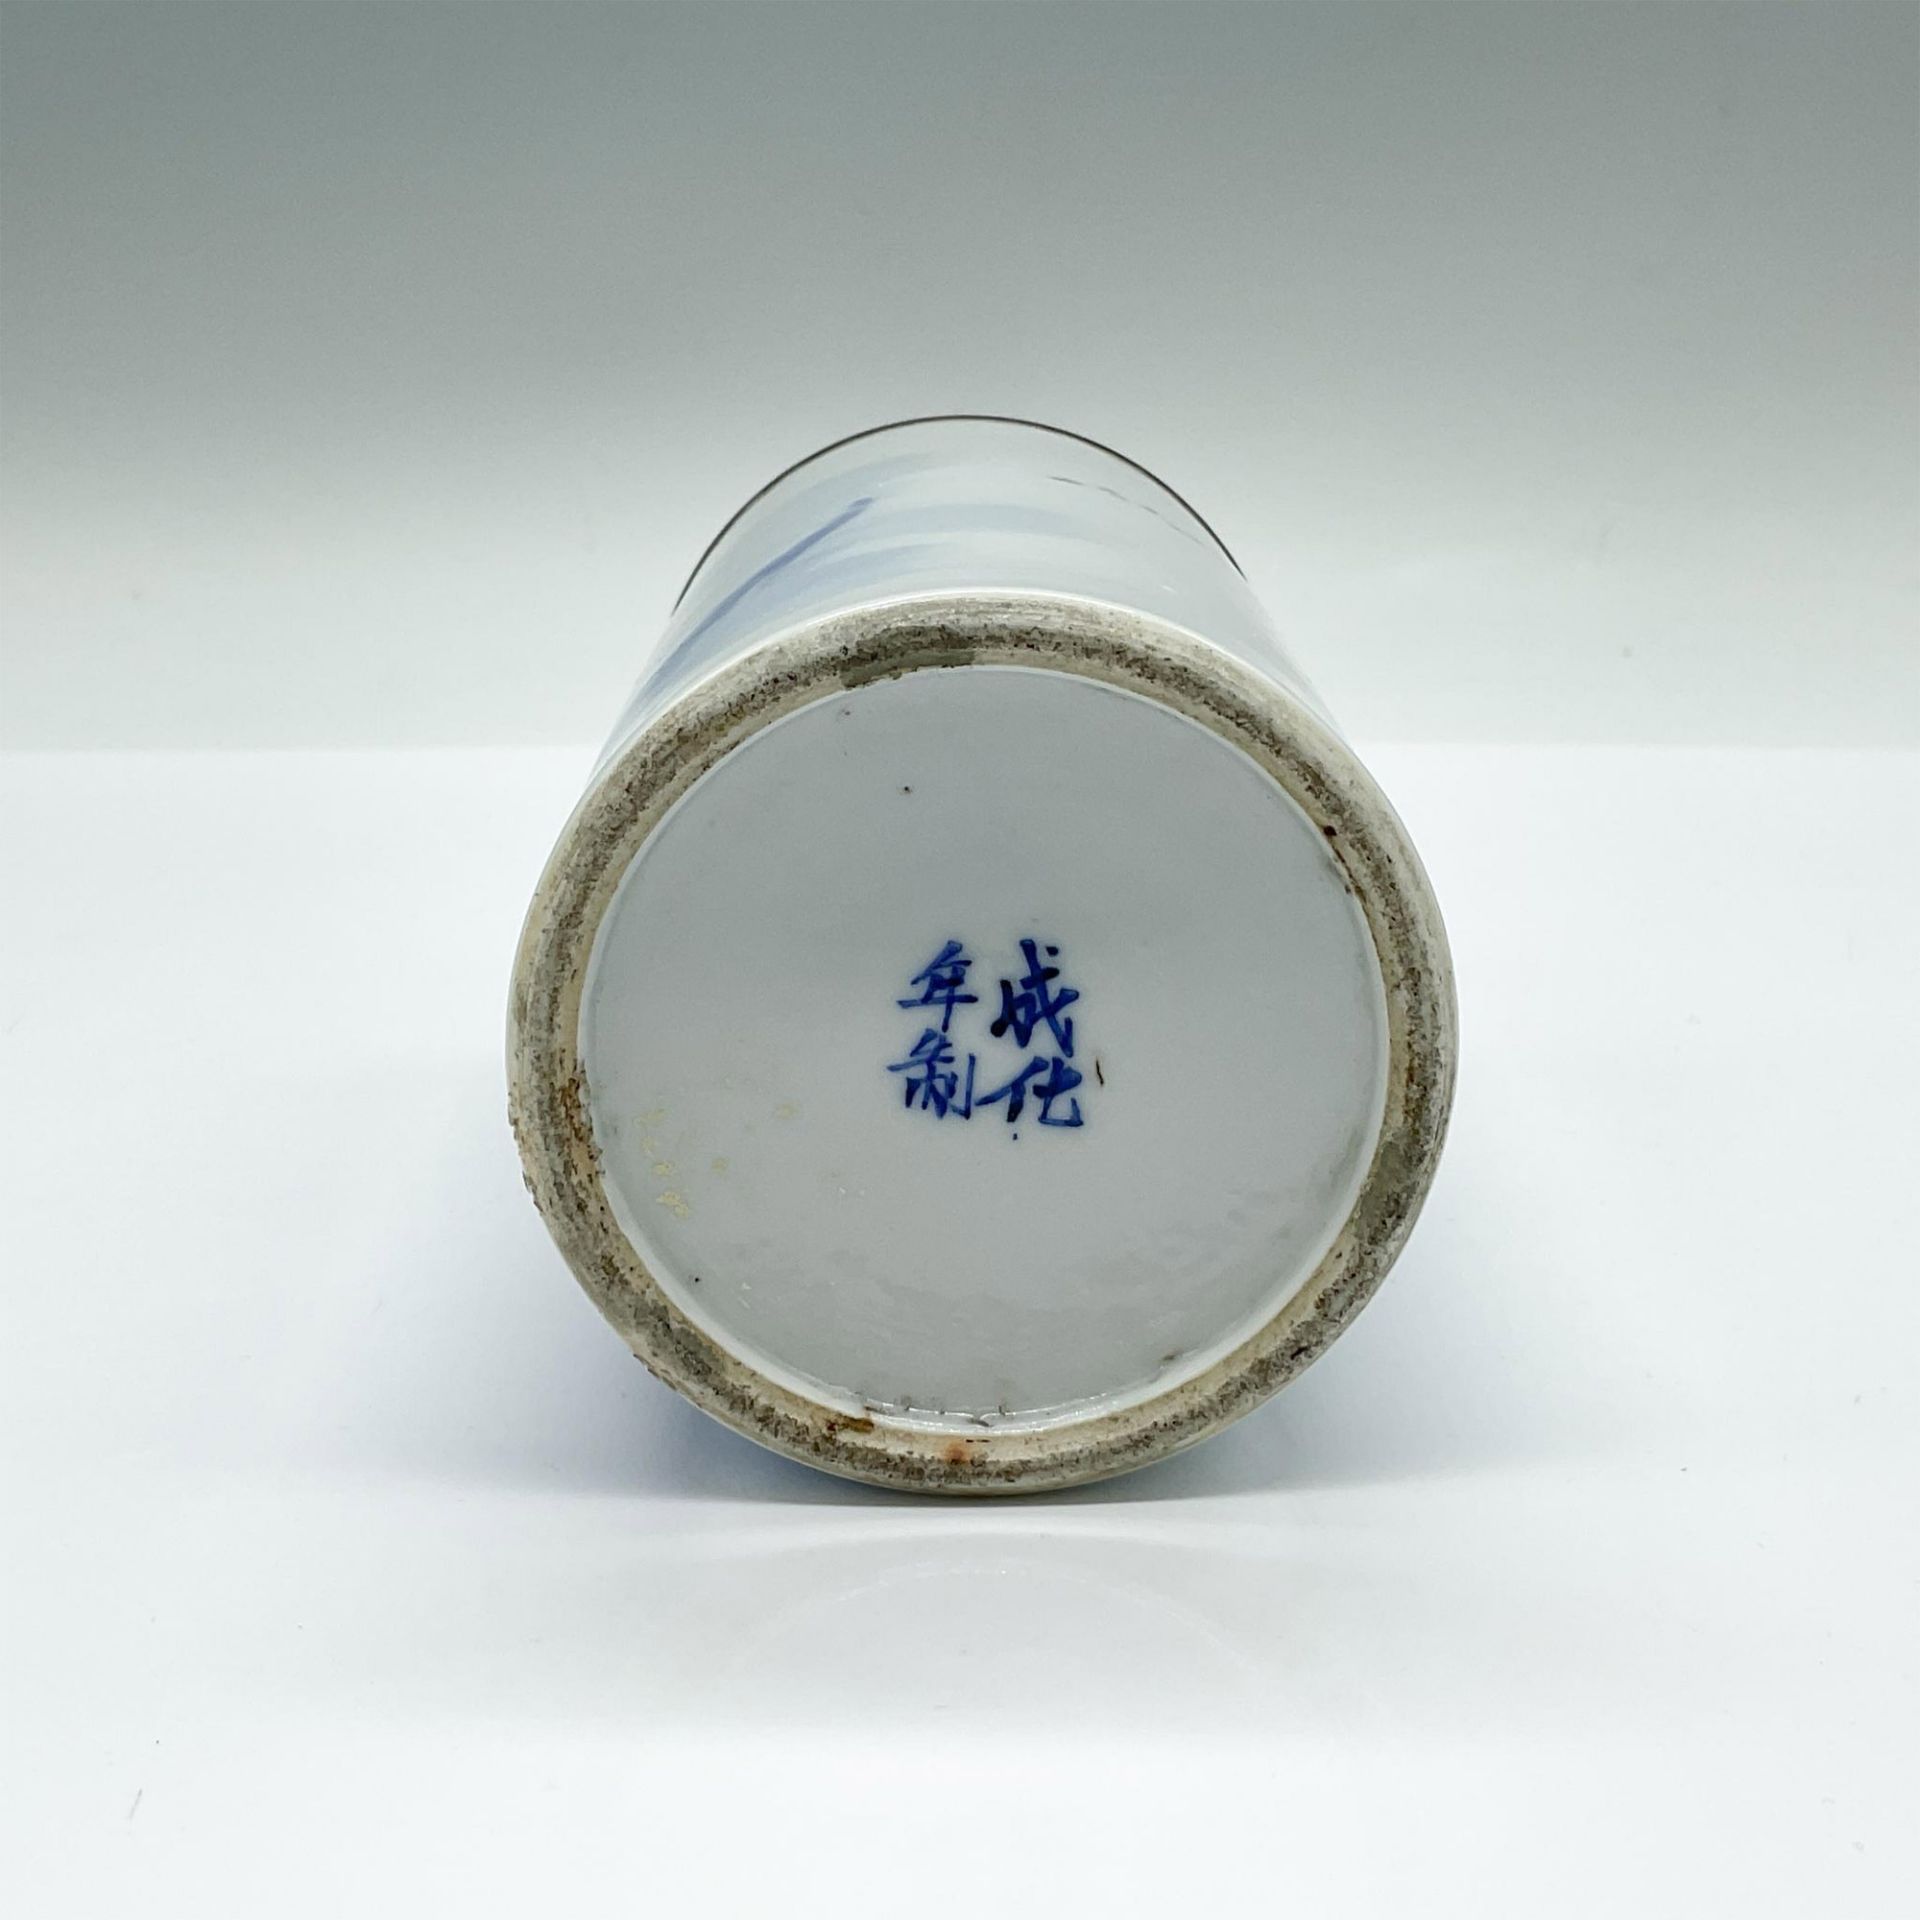 Antique Chinese Blue and White Porcelain Brush Pot - Image 4 of 4